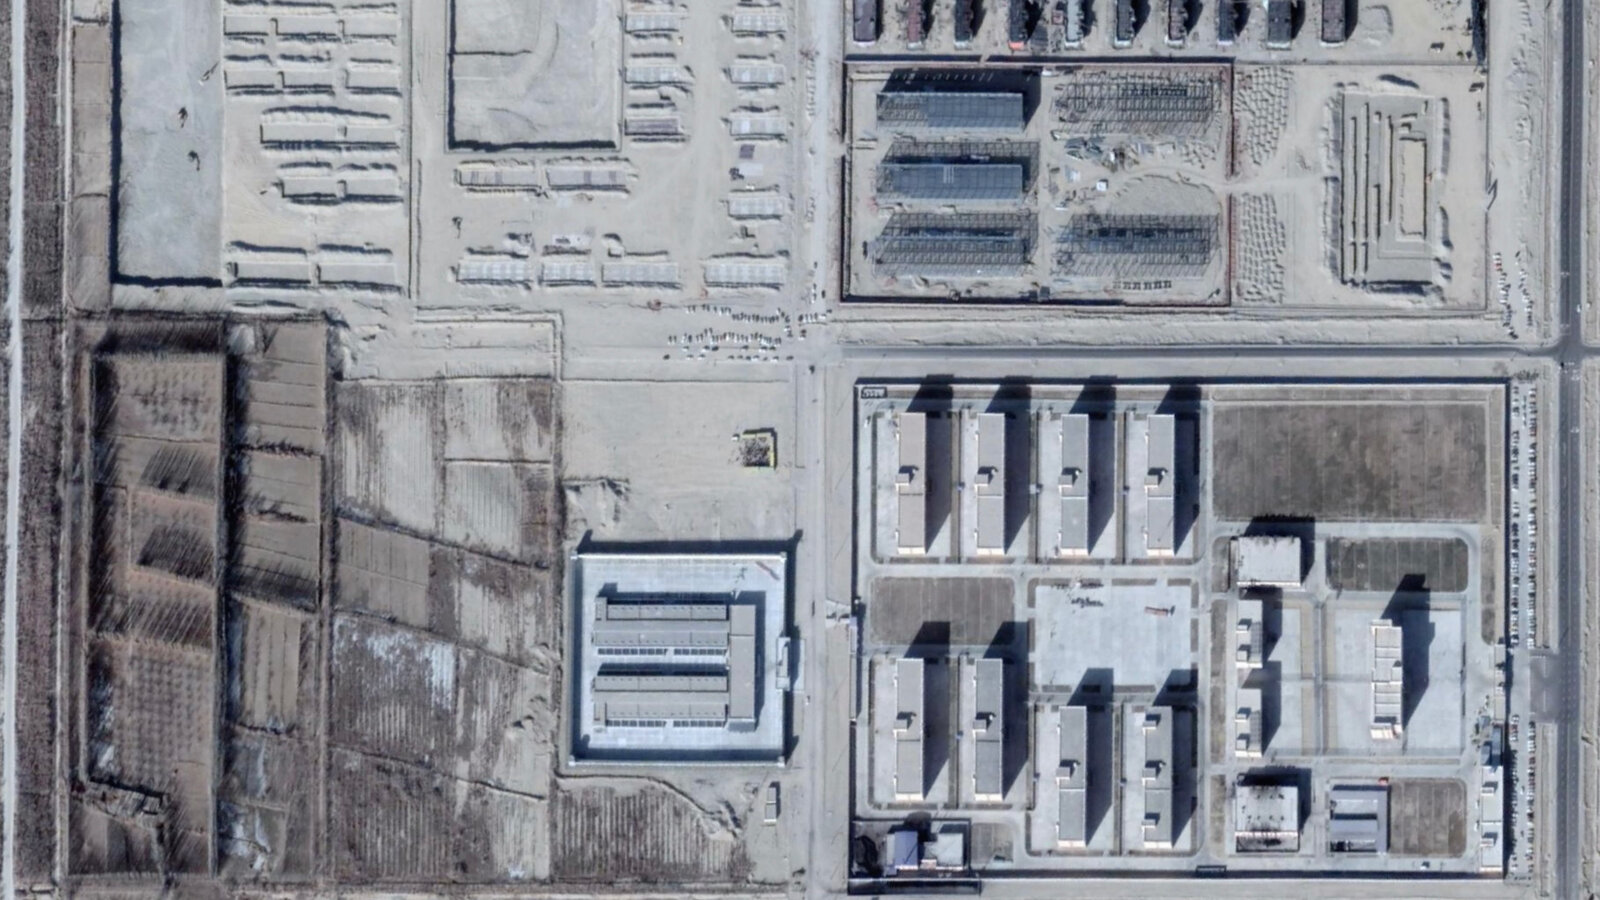 Night Images Reveal Many New Detention Sites in China’s Xinjiang Region